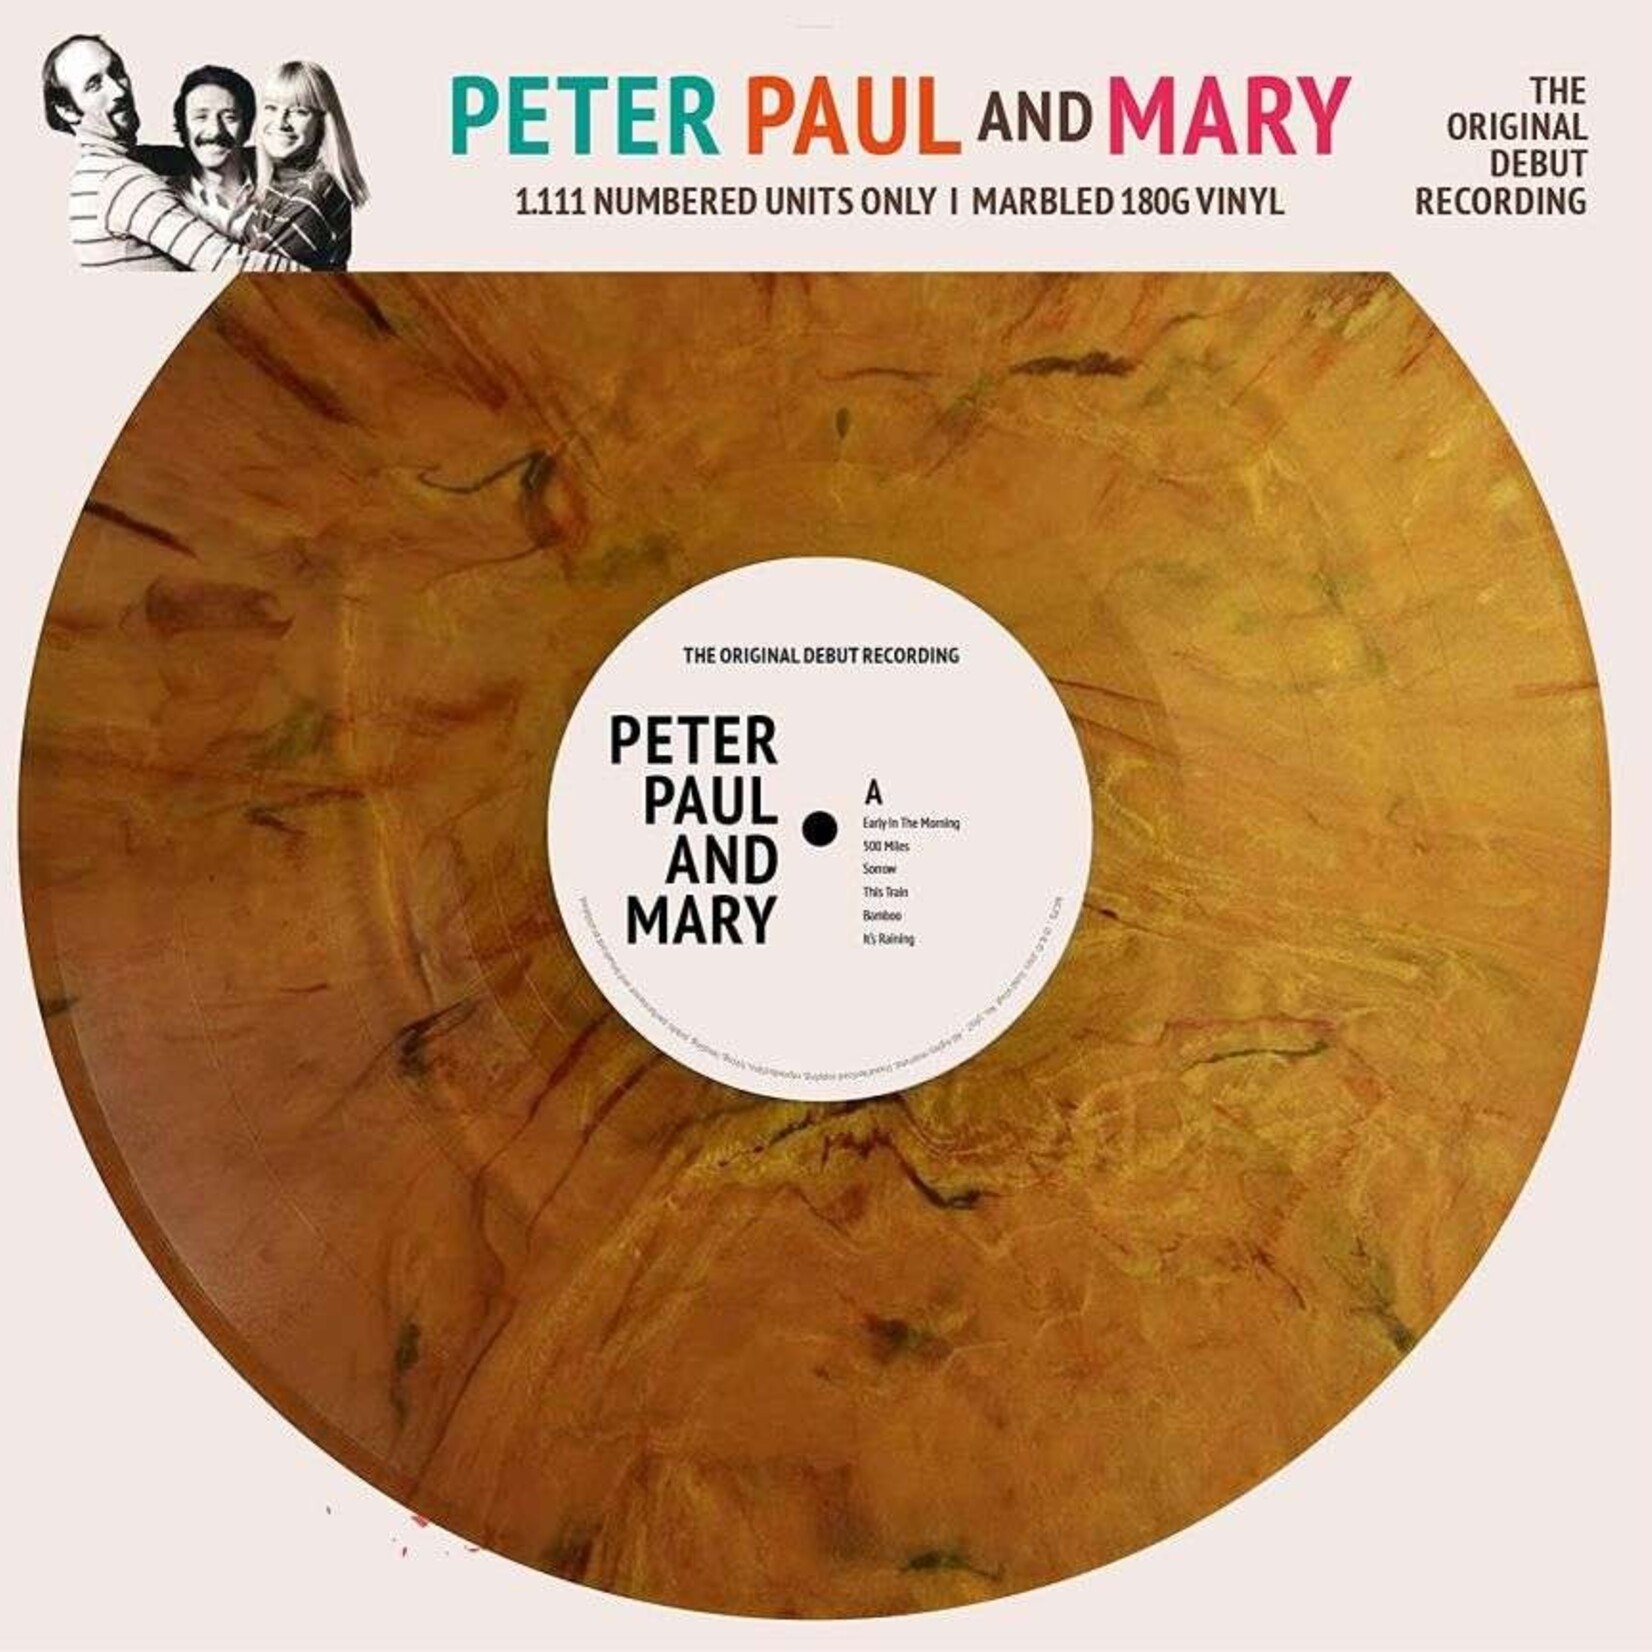 Peter Paul and Mary - Peter Paul and Mary